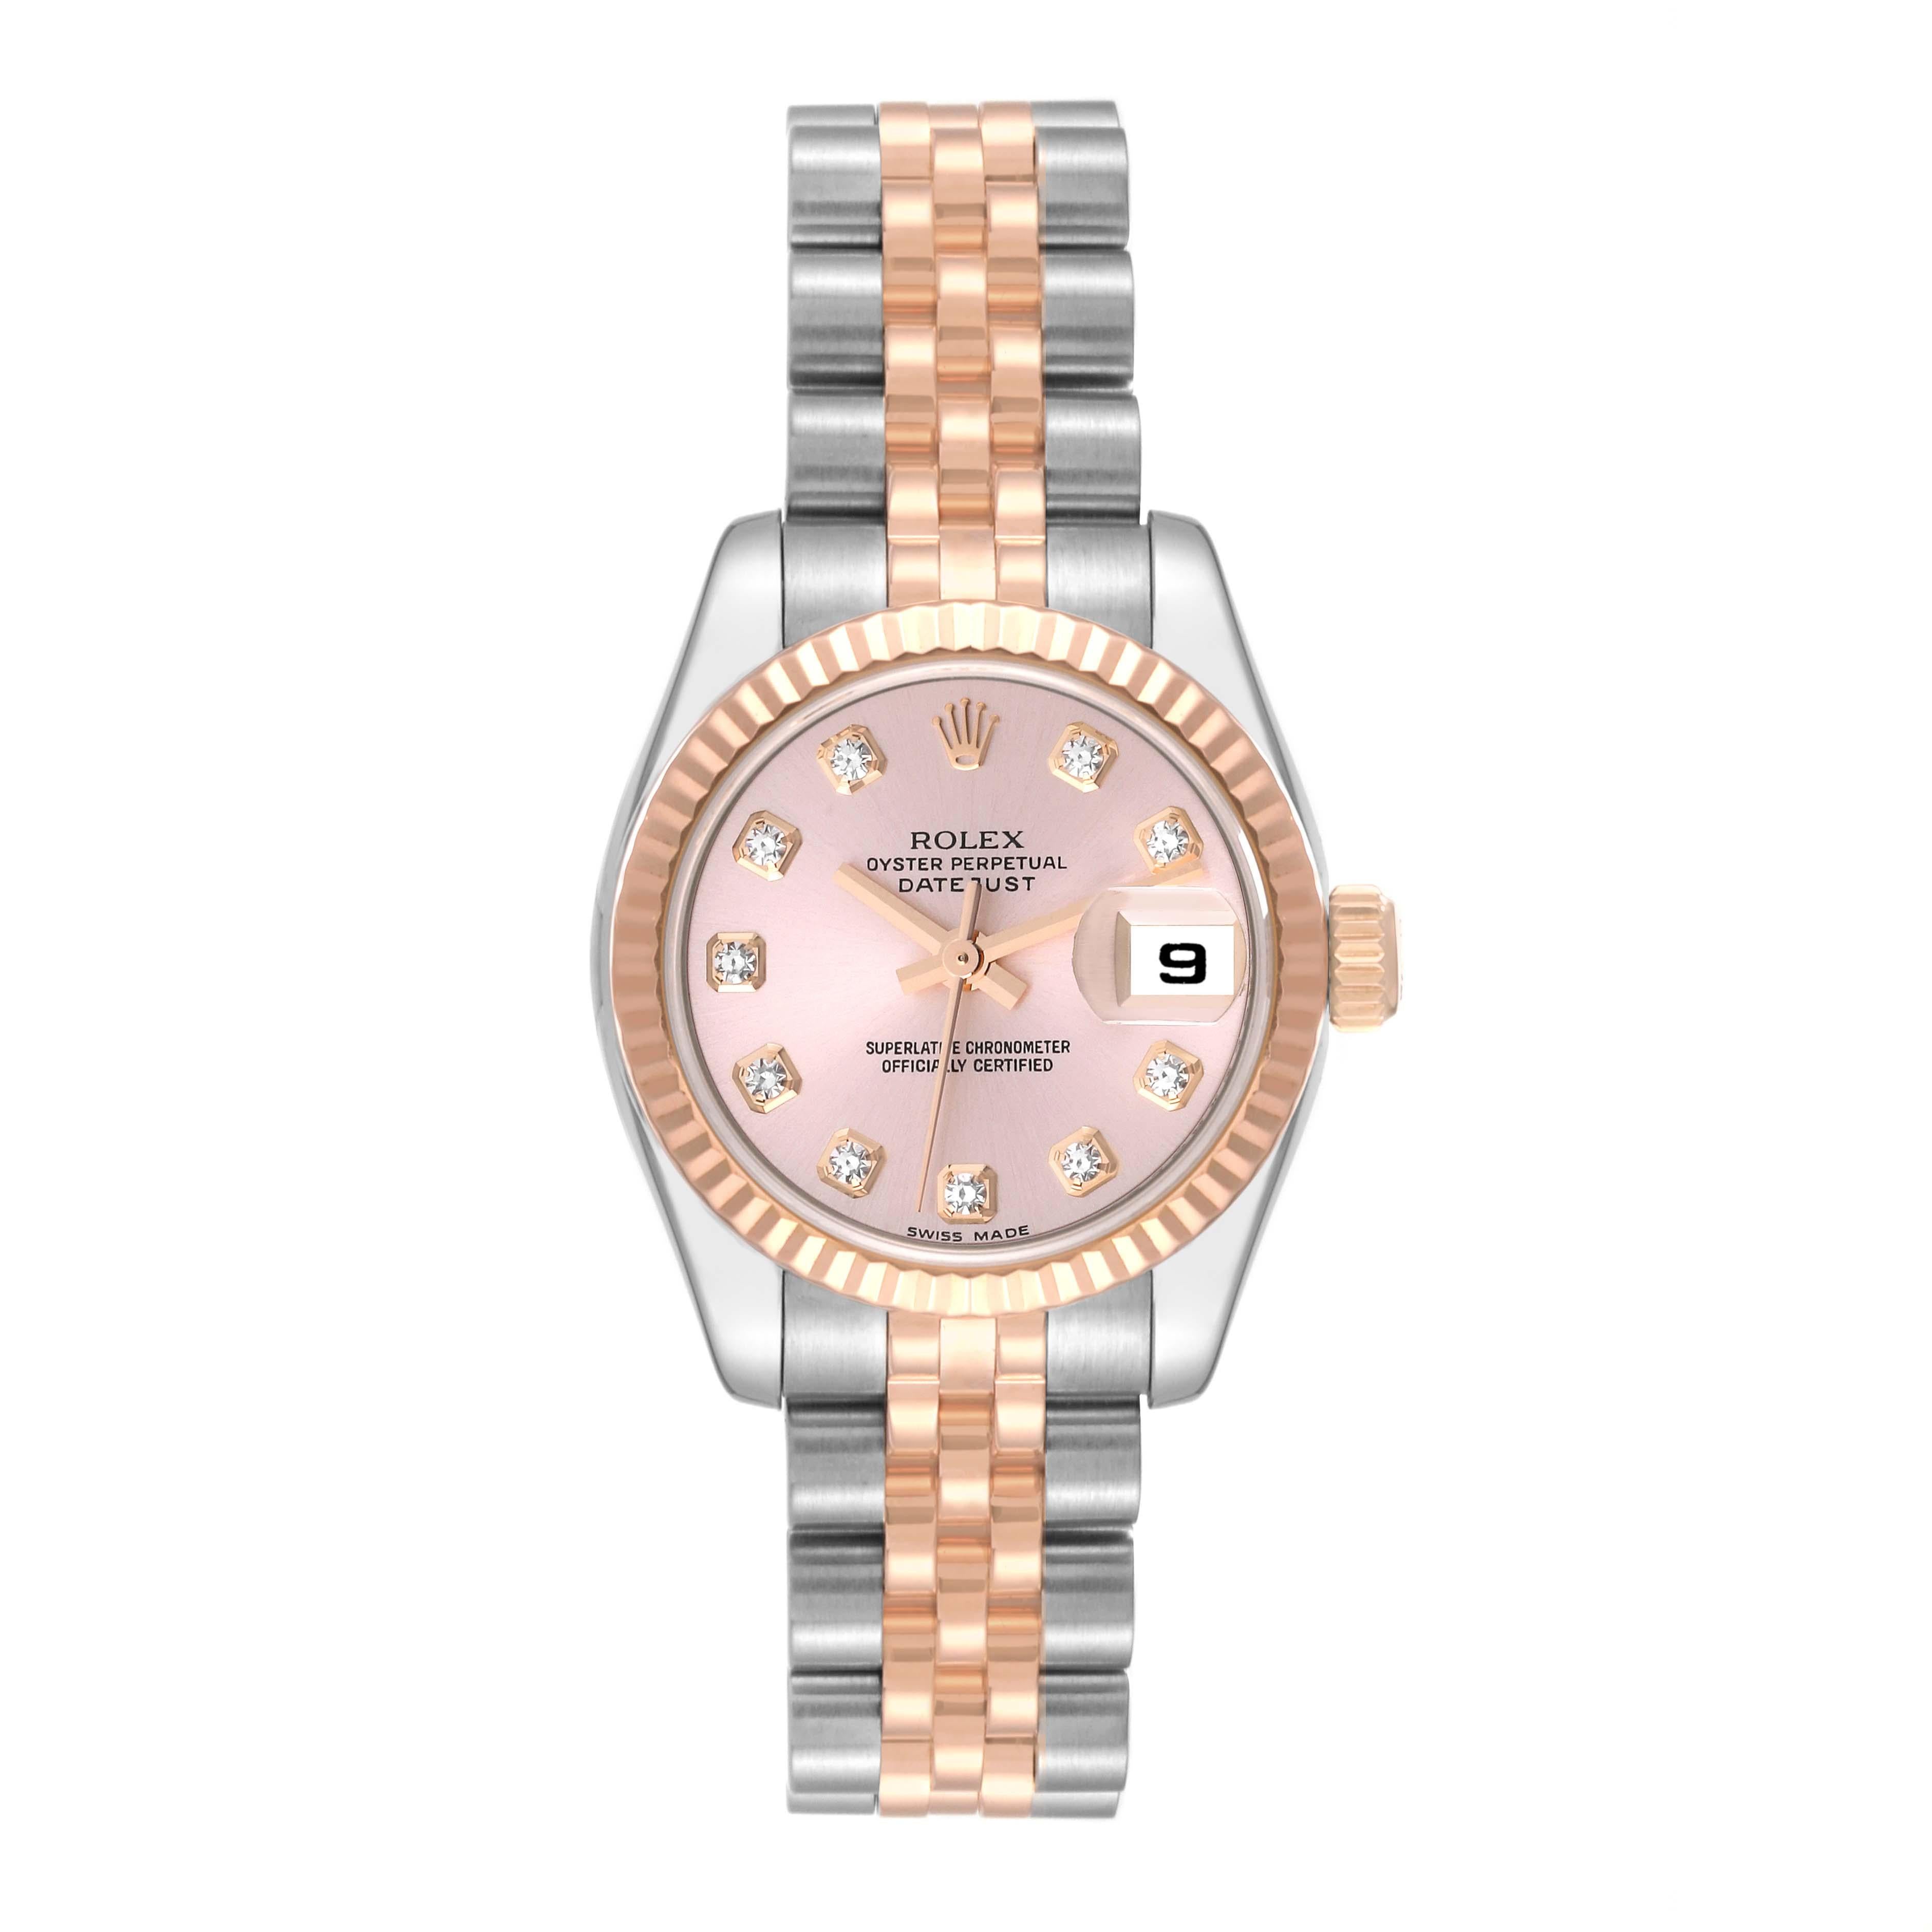 Rolex Datejust Steel Rose Gold Diamond Dial Ladies Watch 179171. Officially certified chronometer automatic self-winding movement. Stainless steel oyster case 26.0 mm in diameter. Rolex logo on an 18K rose gold crown. 18k Everose rose gold fluted